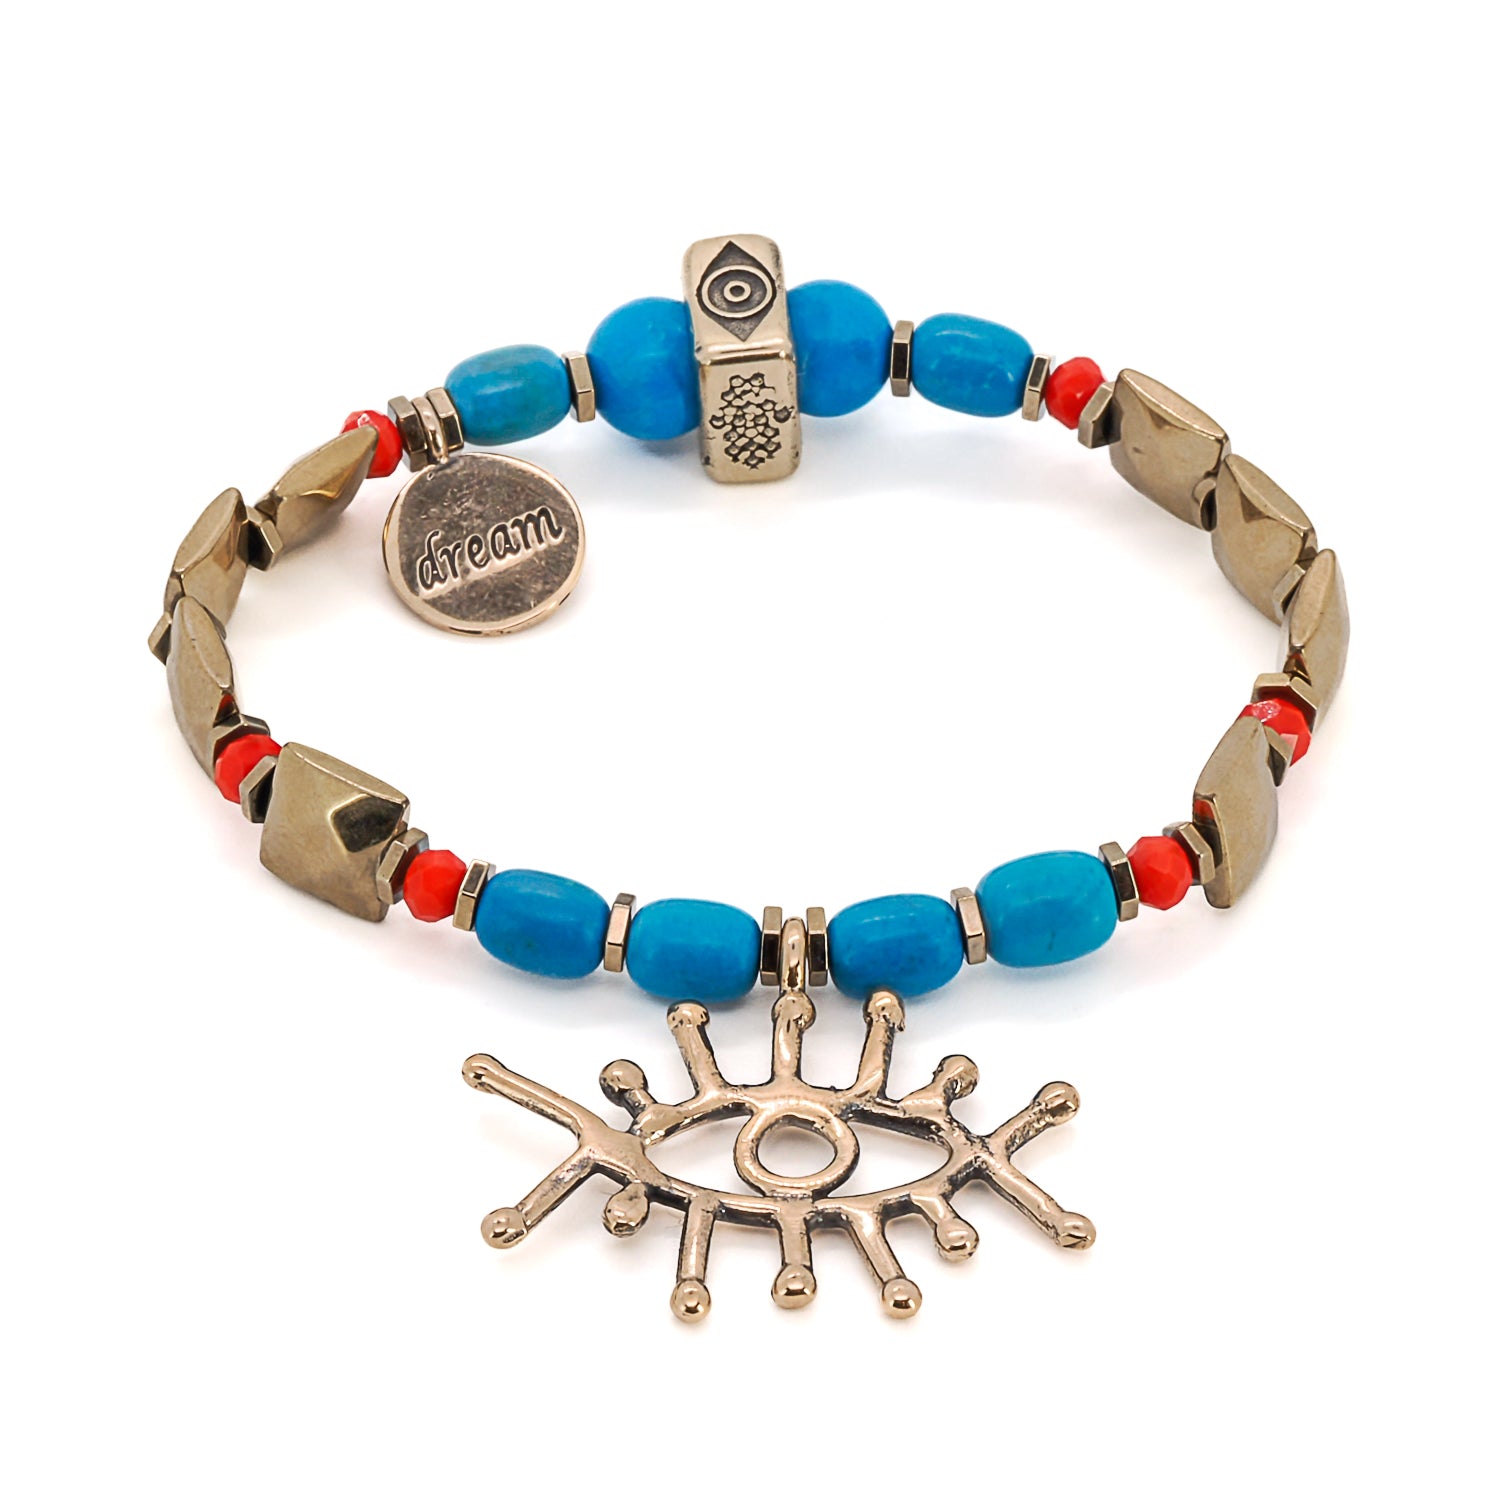 A close-up of the Evil Eye Dream Bracelet, featuring turquoise beads, a gold plated bronze evil eye charm, and a dream symbol charm.